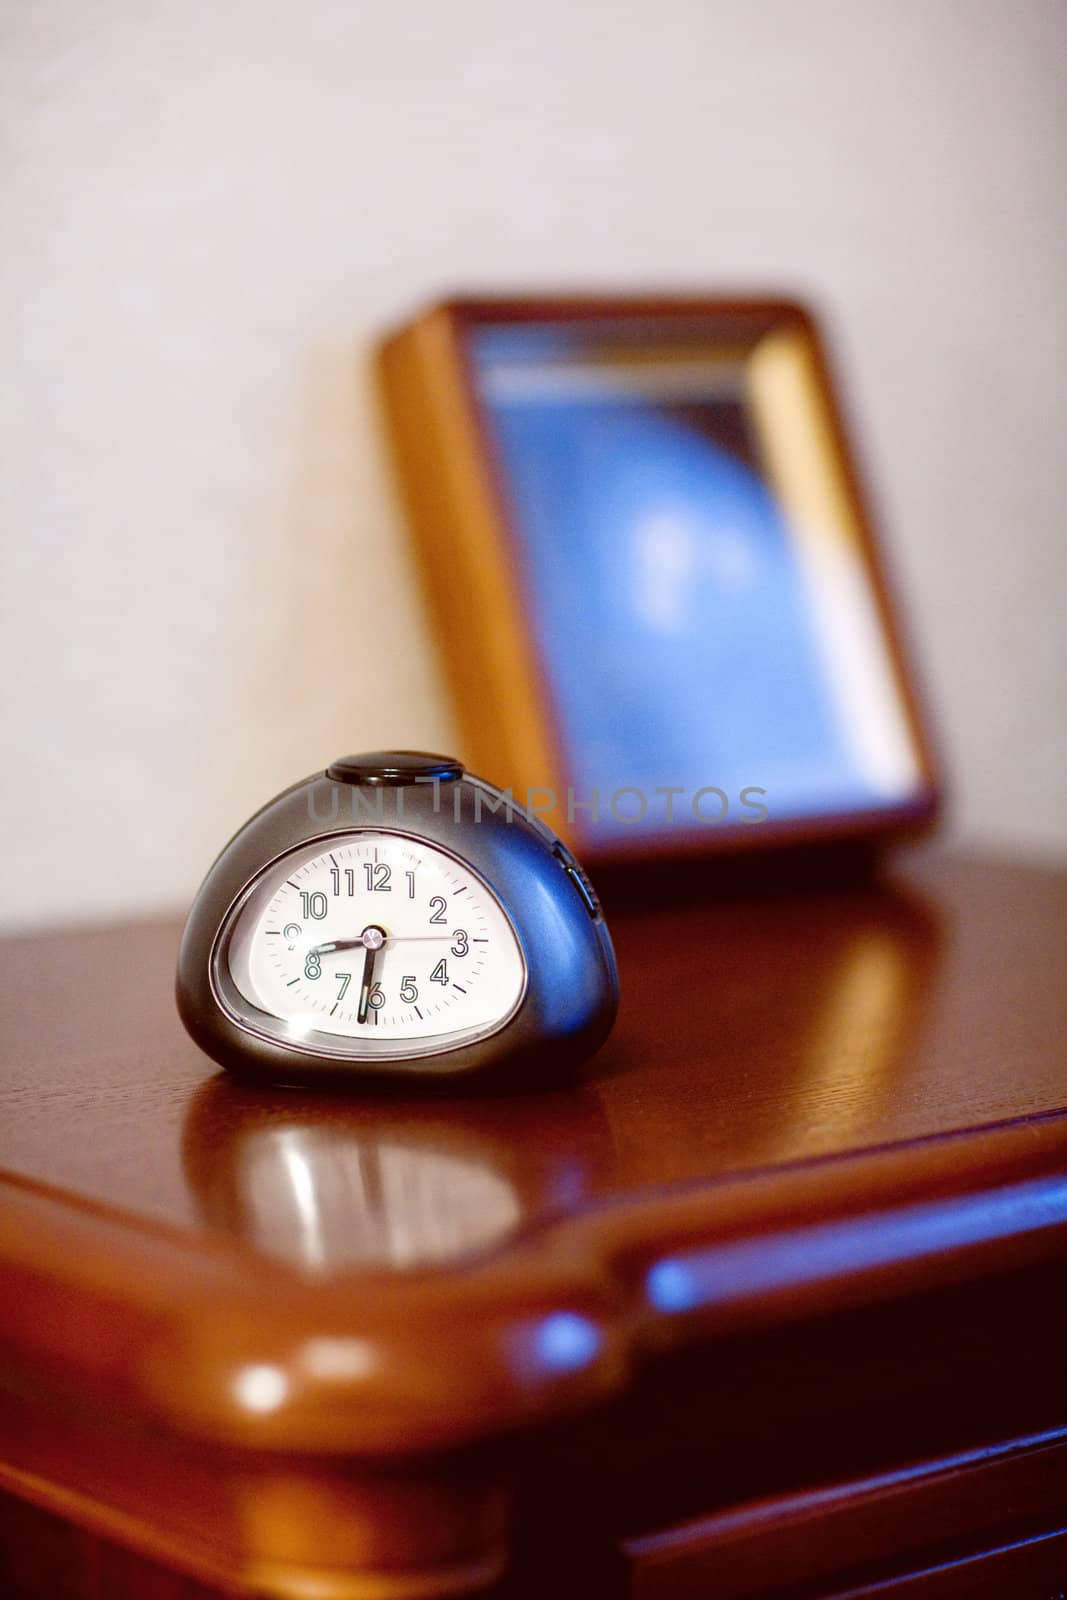 the alarm clock on the table